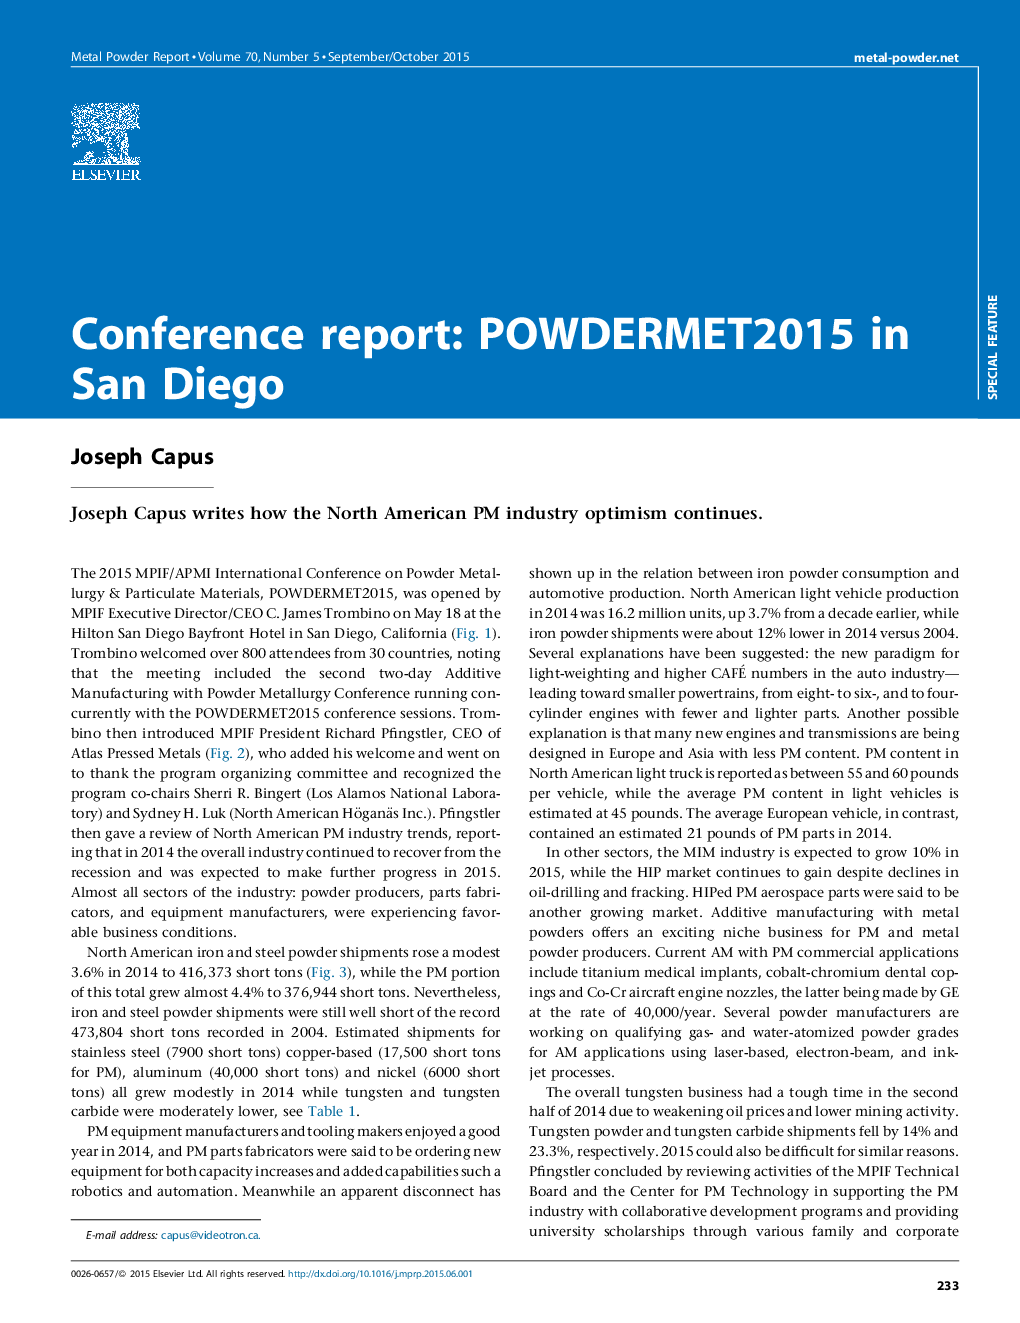 Conference report: POWDERMET2015 in San Diego